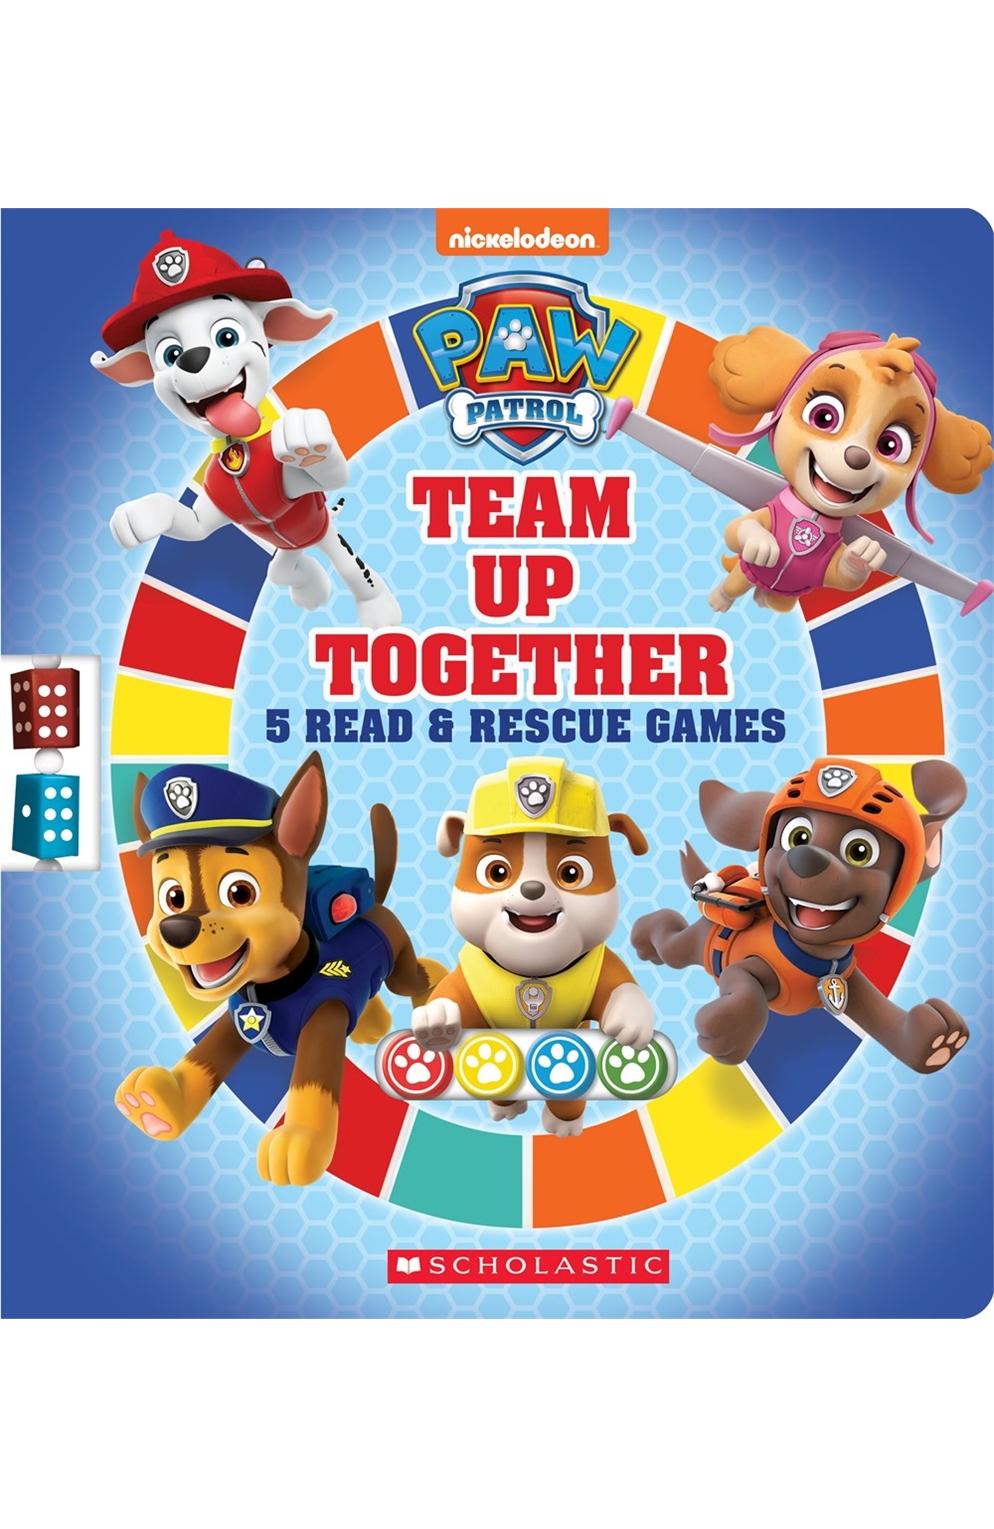 Team Up Together: 5 Read & Rescue Games Paw Patrol